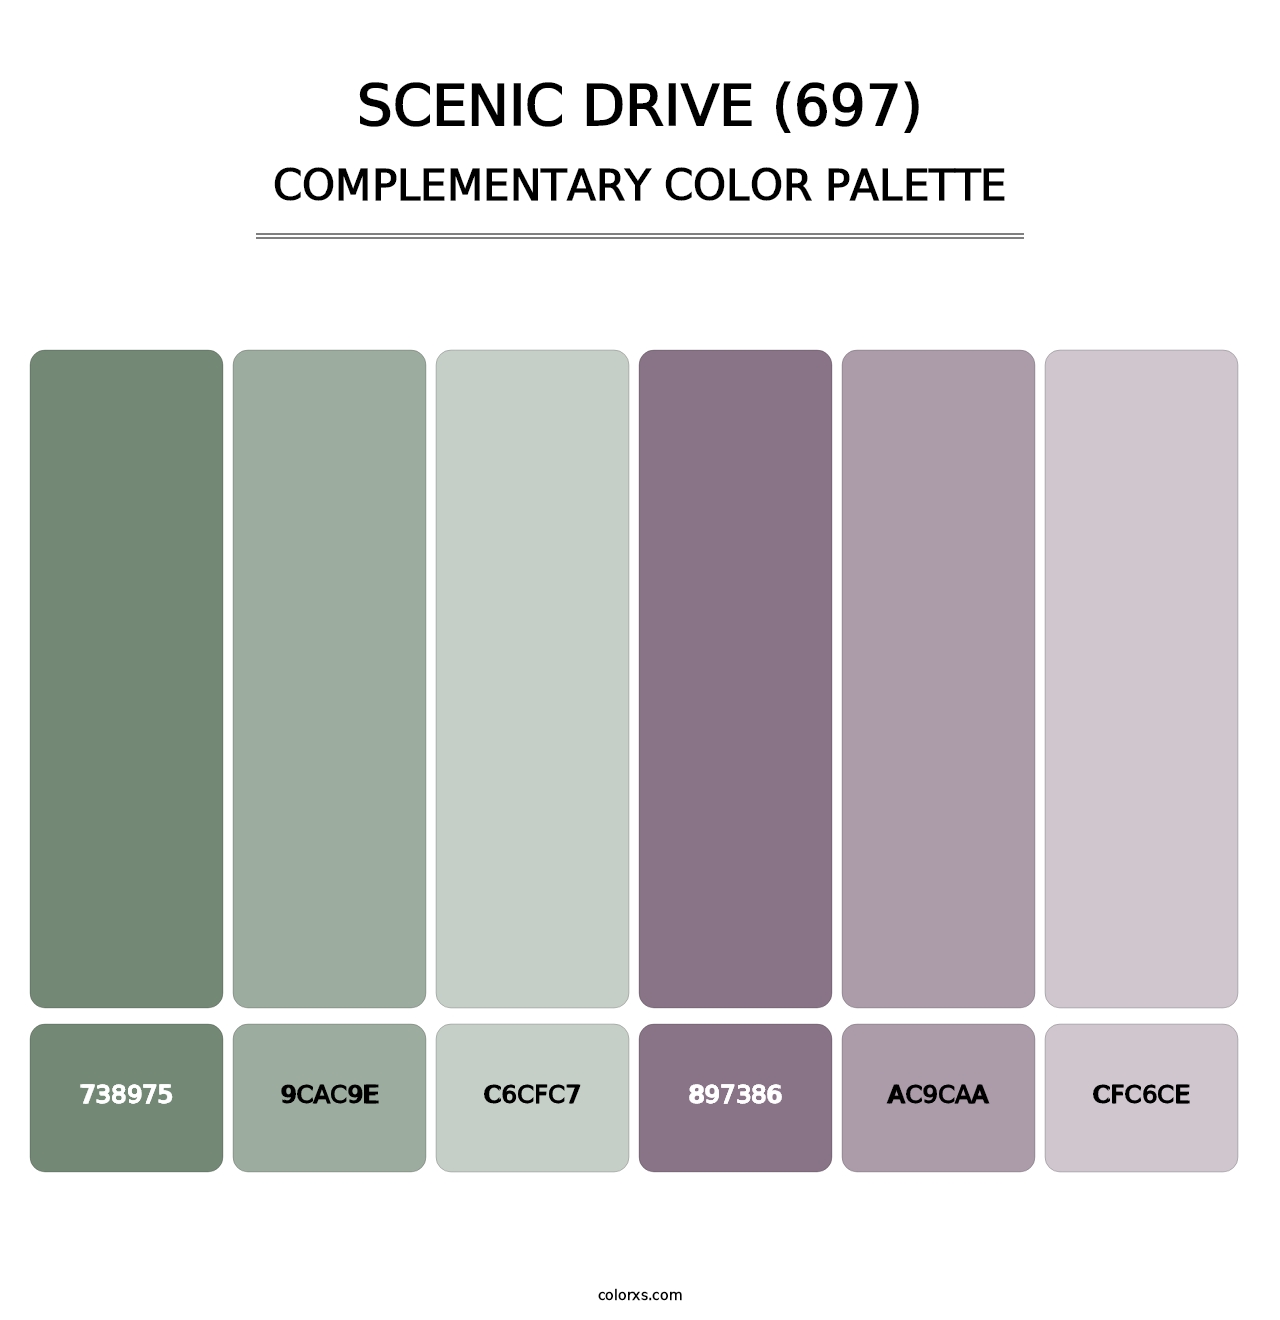 Scenic Drive (697) - Complementary Color Palette